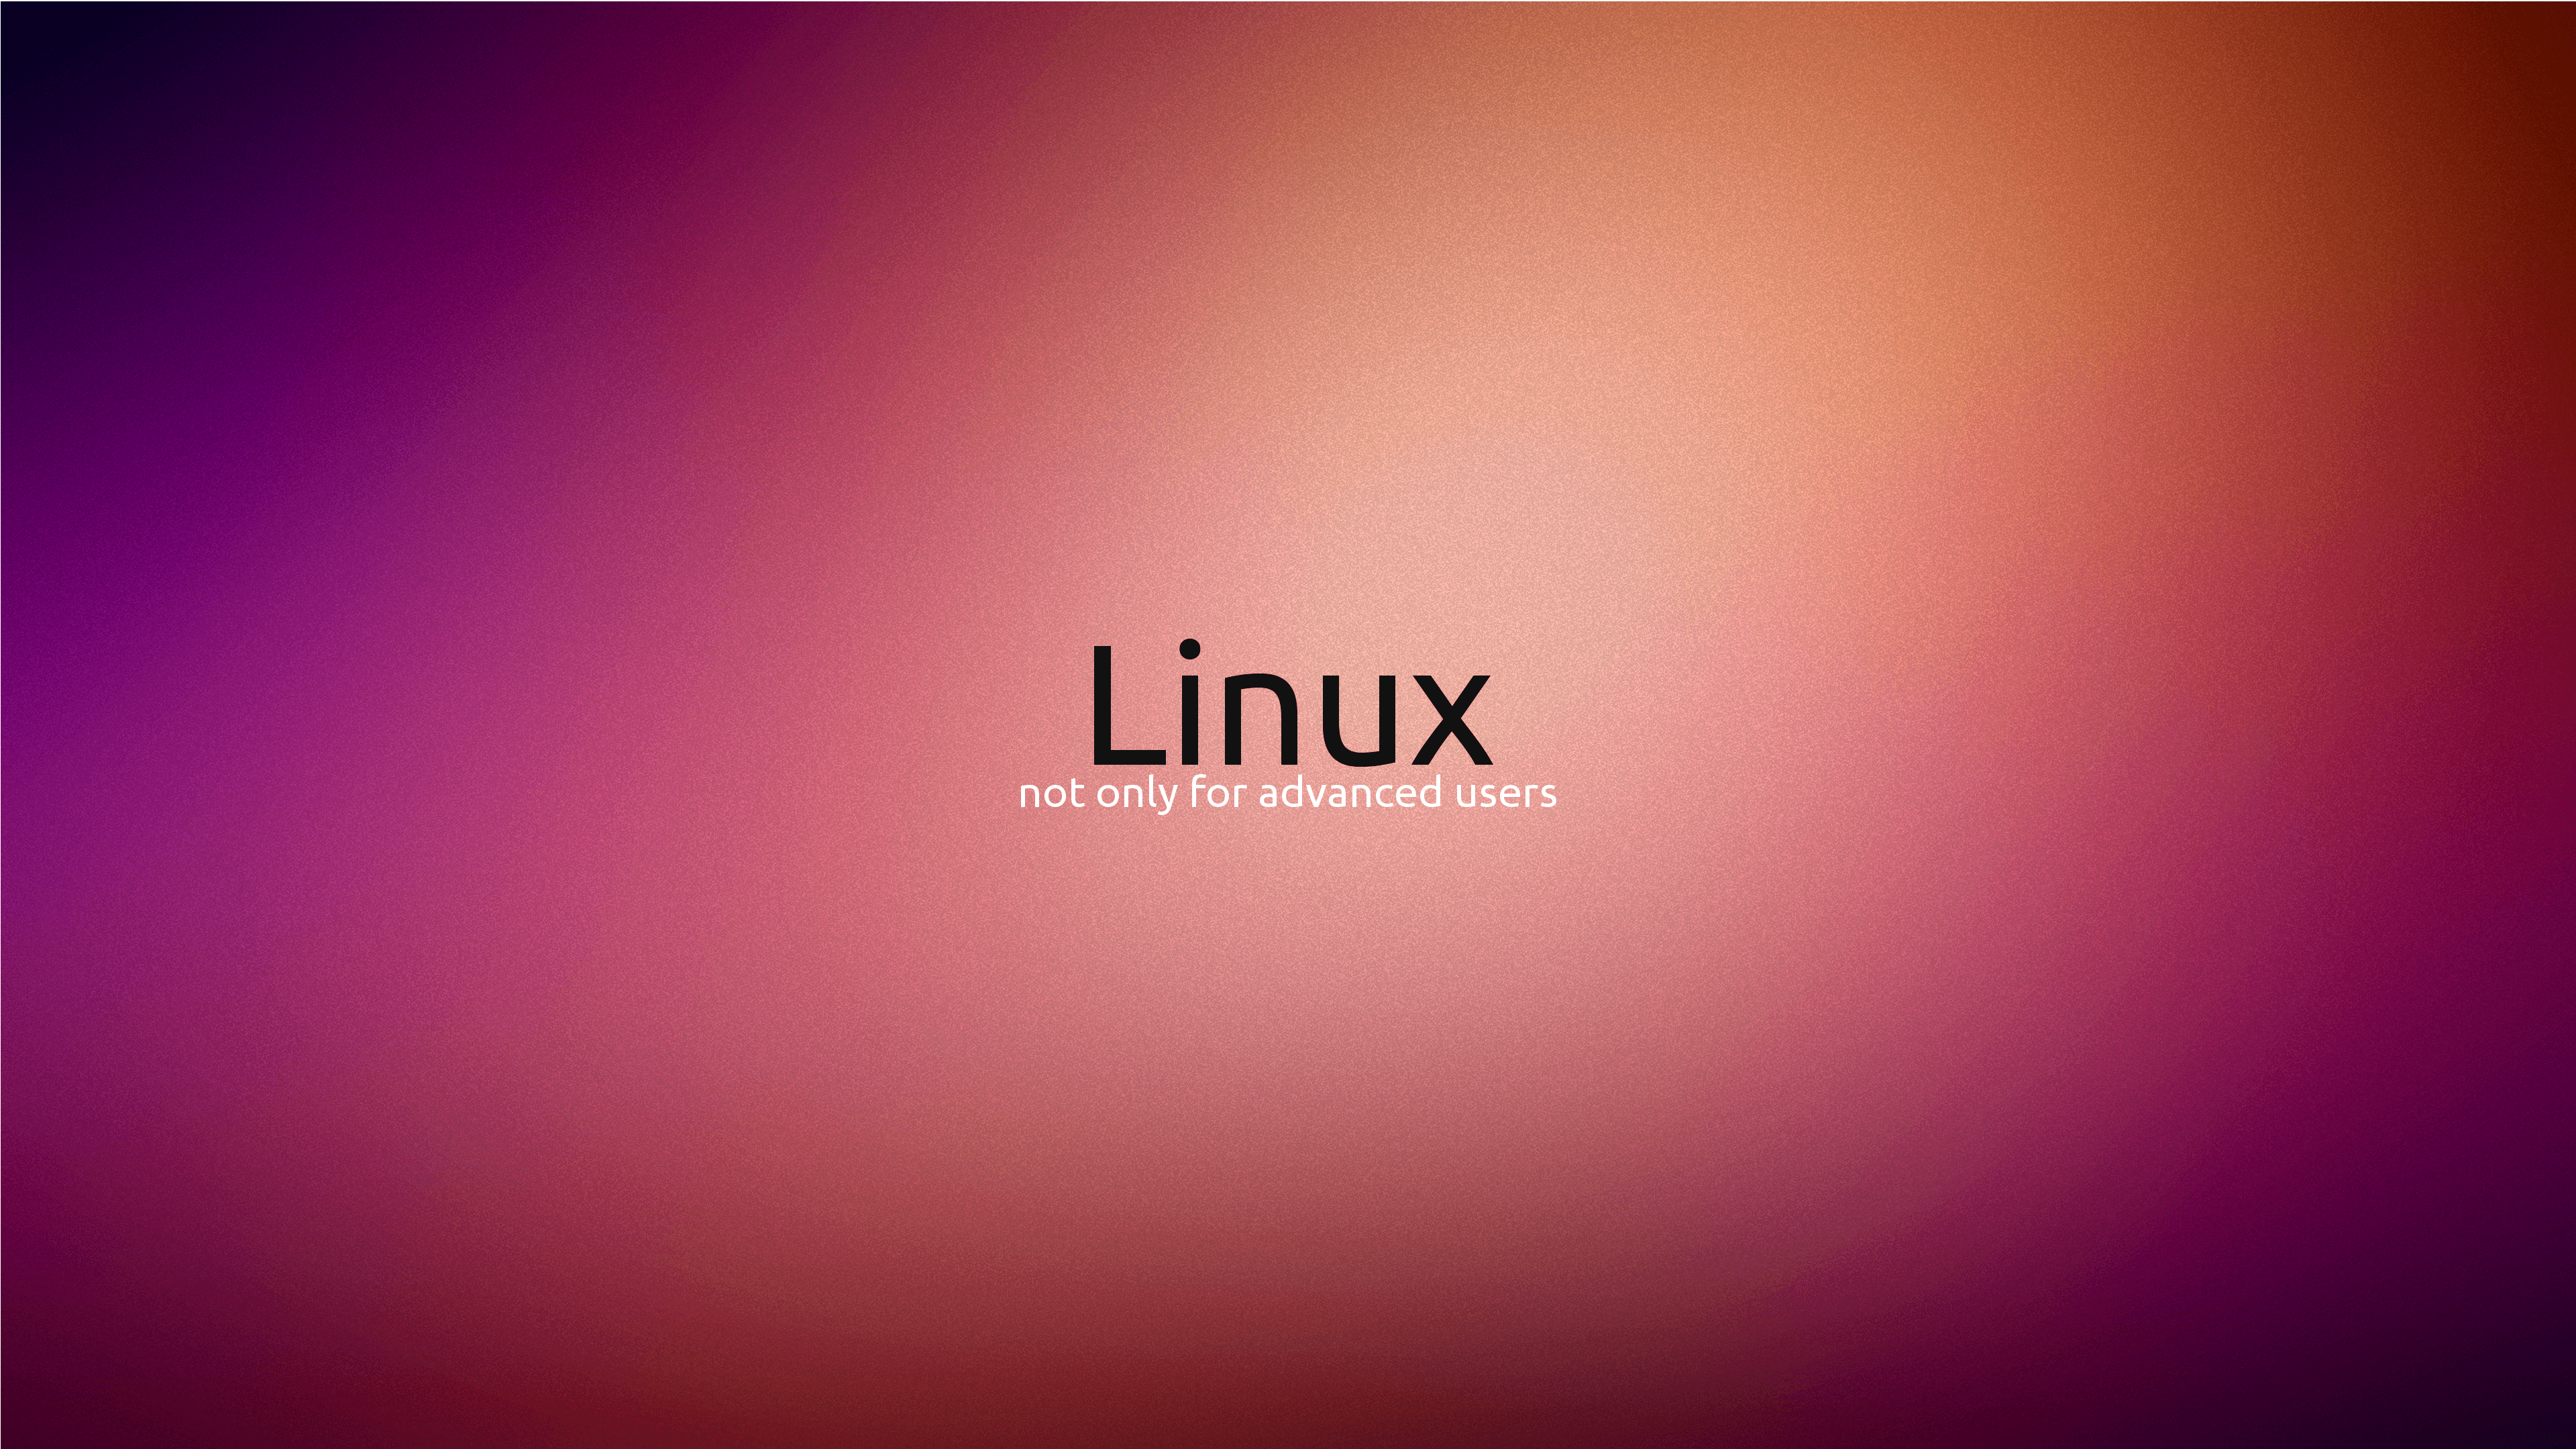 High Resolution Linux Background Image for Free